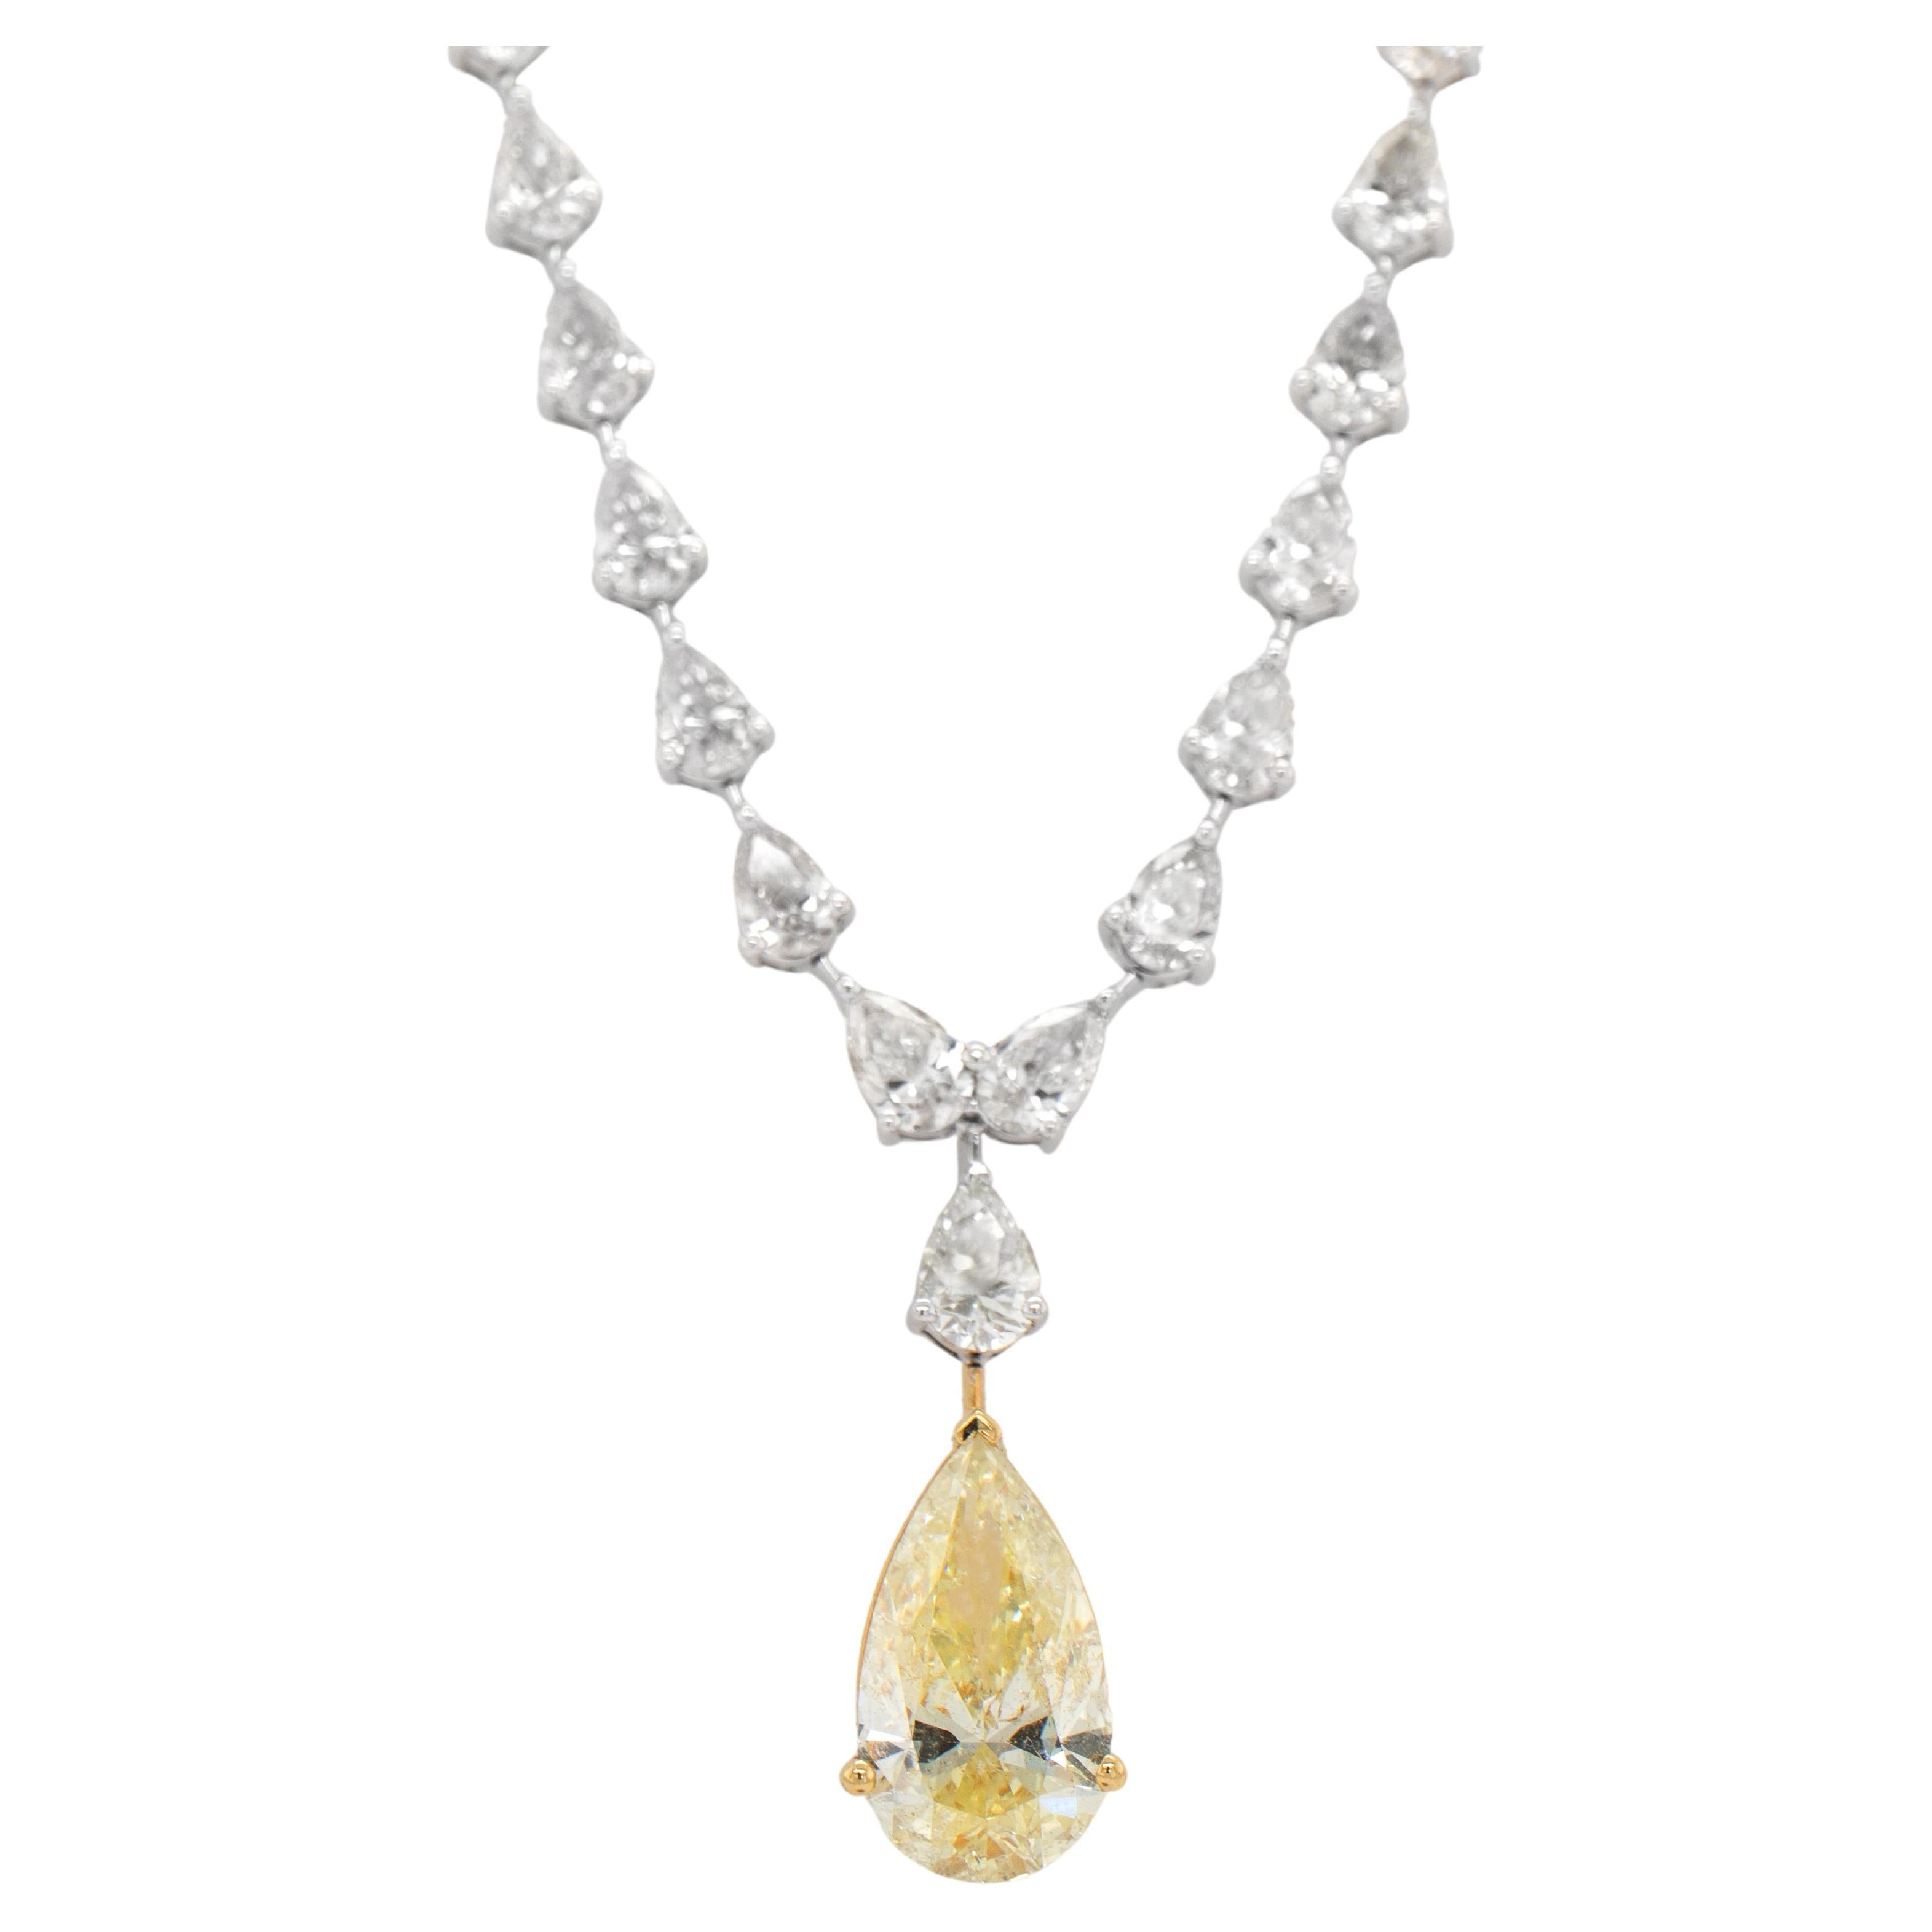 Important Light Yellow Pear Diamond Pendant Necklace 10.6 Carats Total 18K Gold For Sale